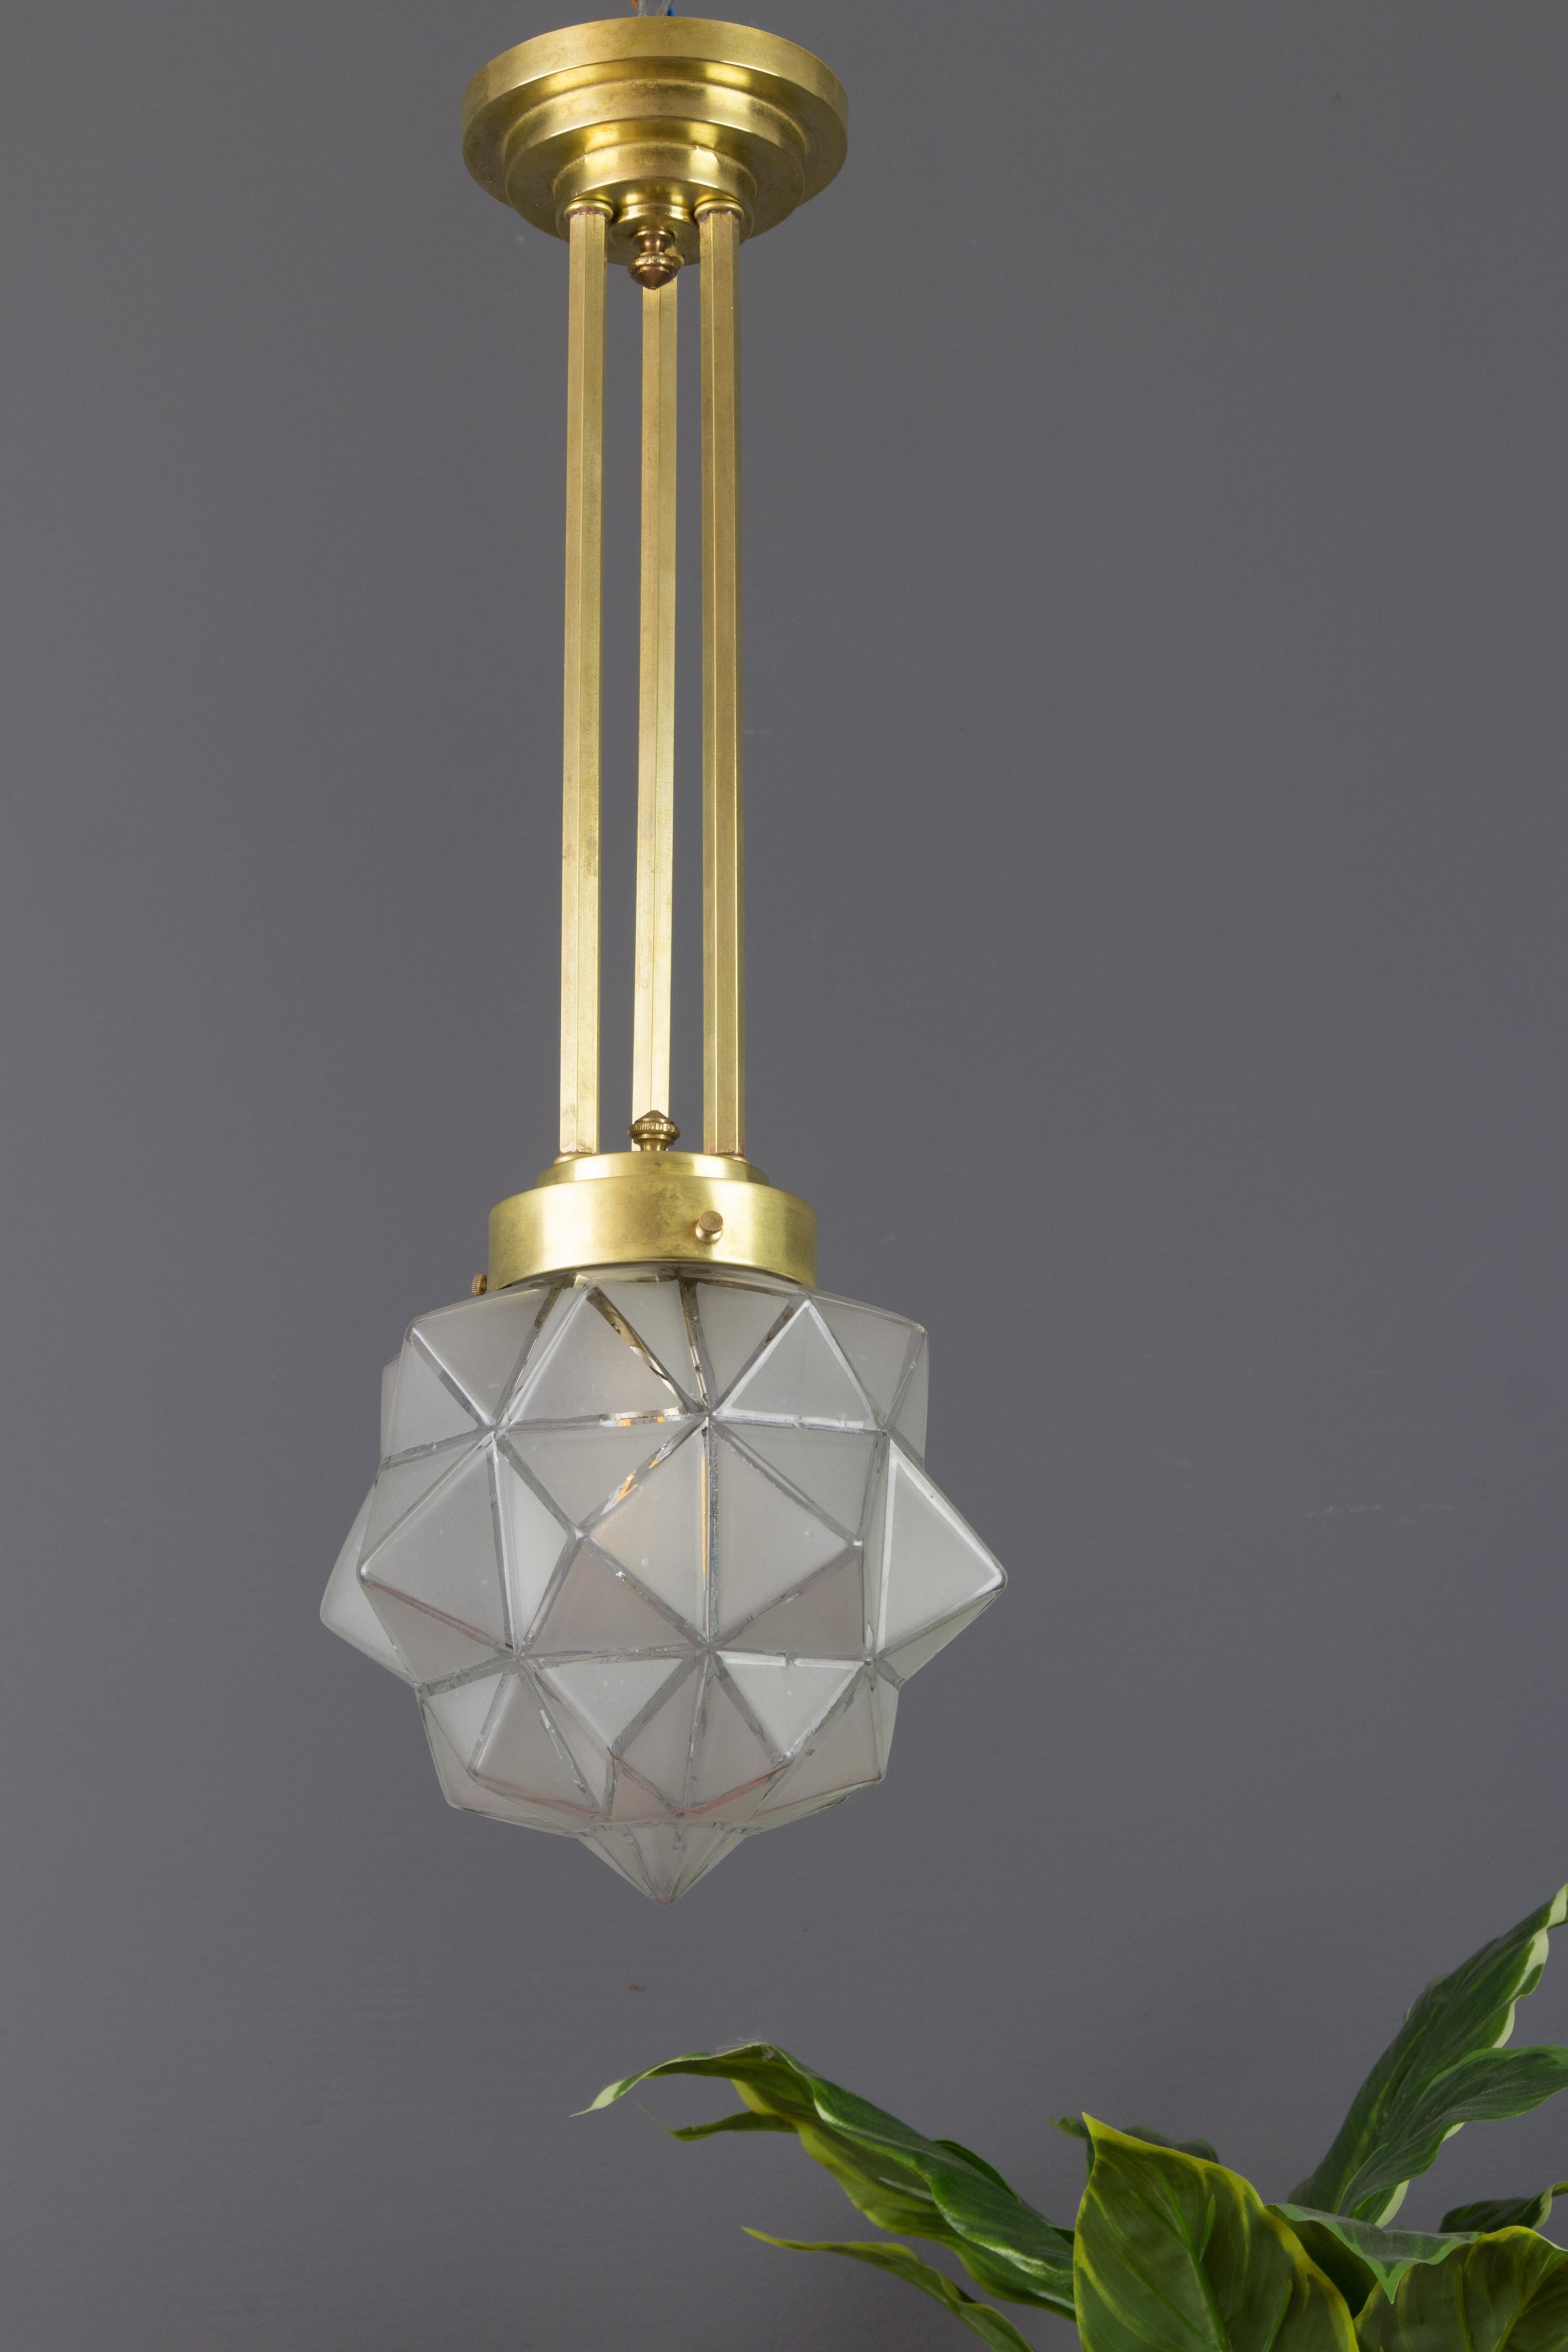 French Art Deco Brass and White Frosted Glass Pendant Light, France, 1930s For Sale